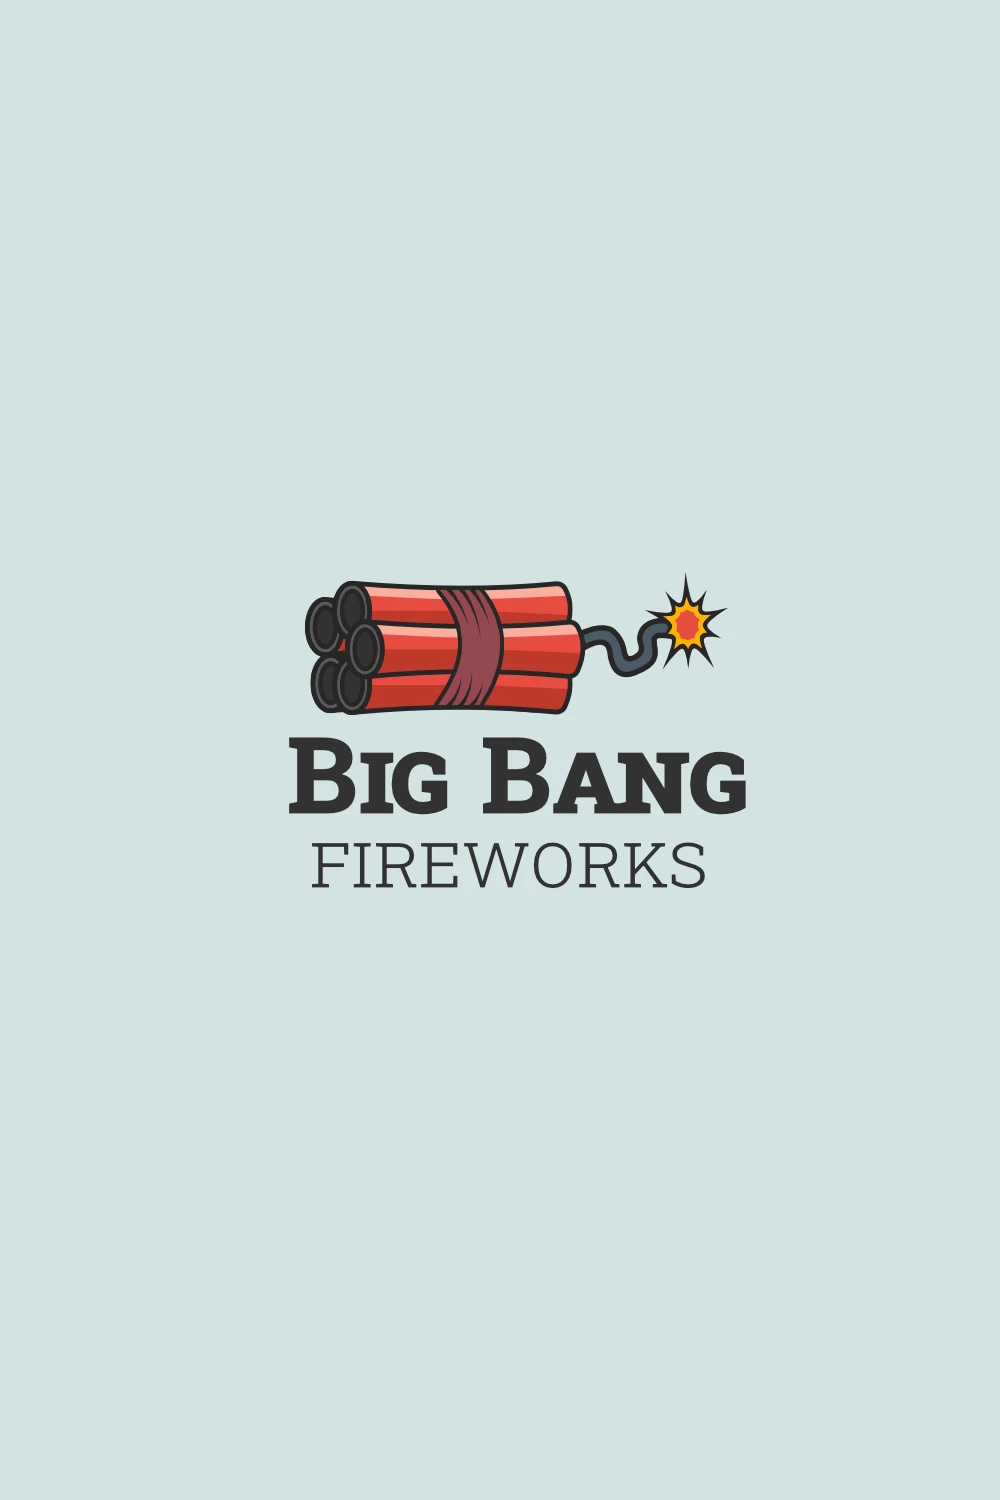 Memorable Logo Design that looks like a 5 rod dynamite and the fuse is lid. But the text says: "Big Bang Fireworks"